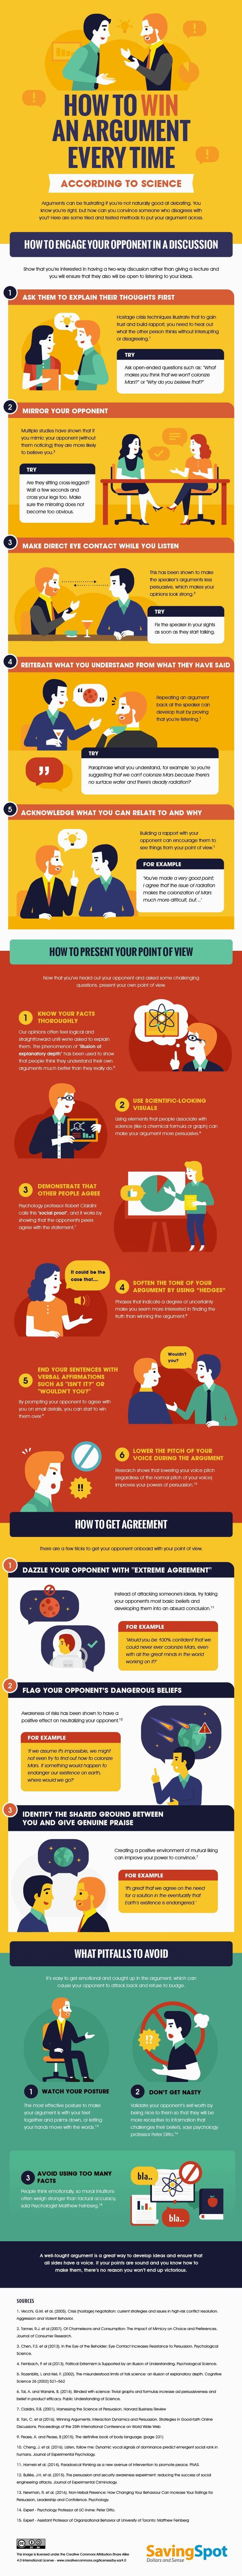 Psychology-Infographic-How-to-Win-an-Argument-According Psychology Infographic : How to Win an Argument - According to Science #infographic #ad